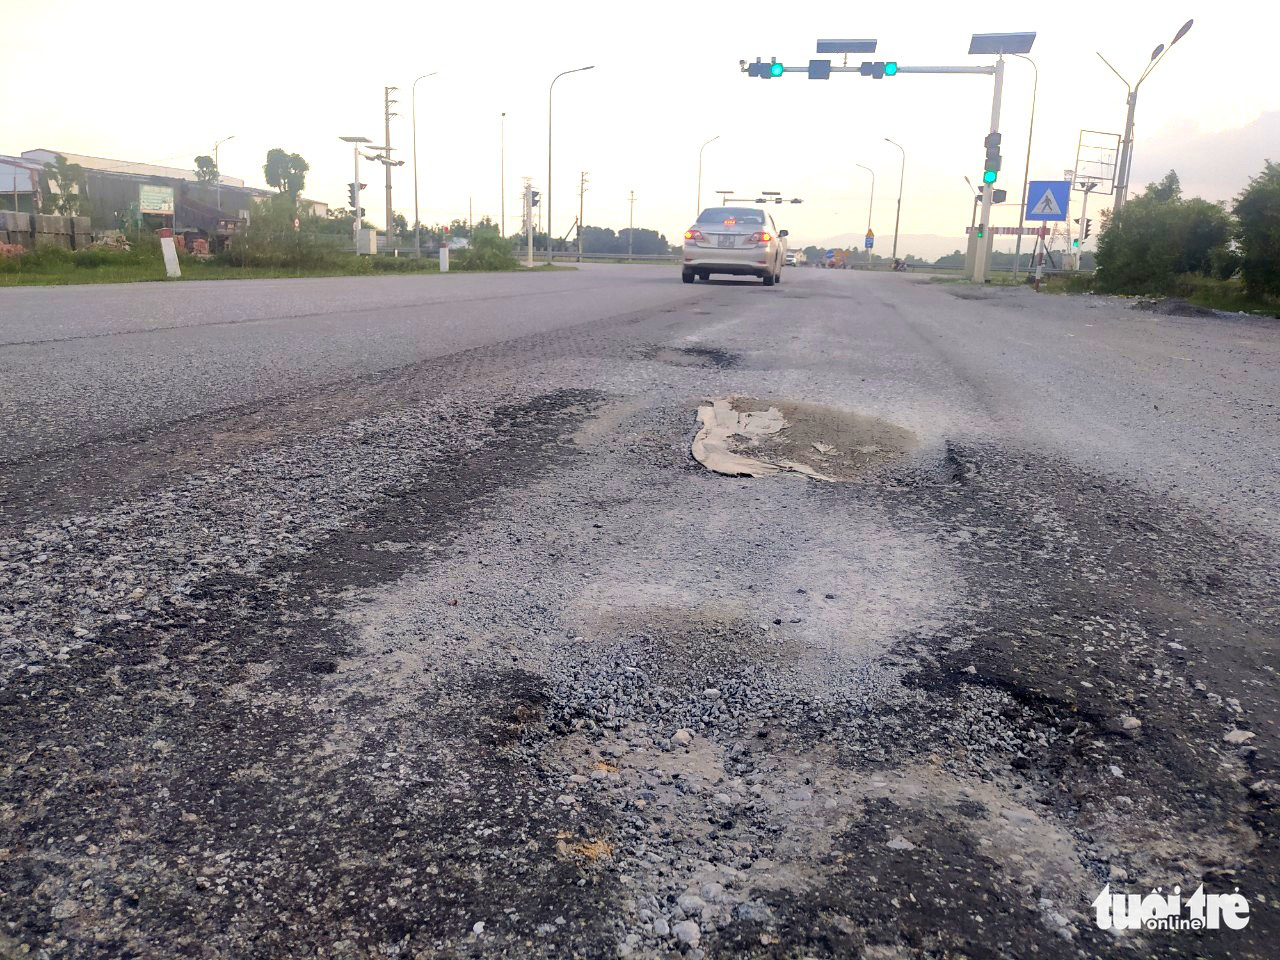 The road surface is temporarily fixed on National Highway No.1 in Ha Tinh Province, Vietnam, October 4, 2022. Photo: Le Minh / Tuoi Tre